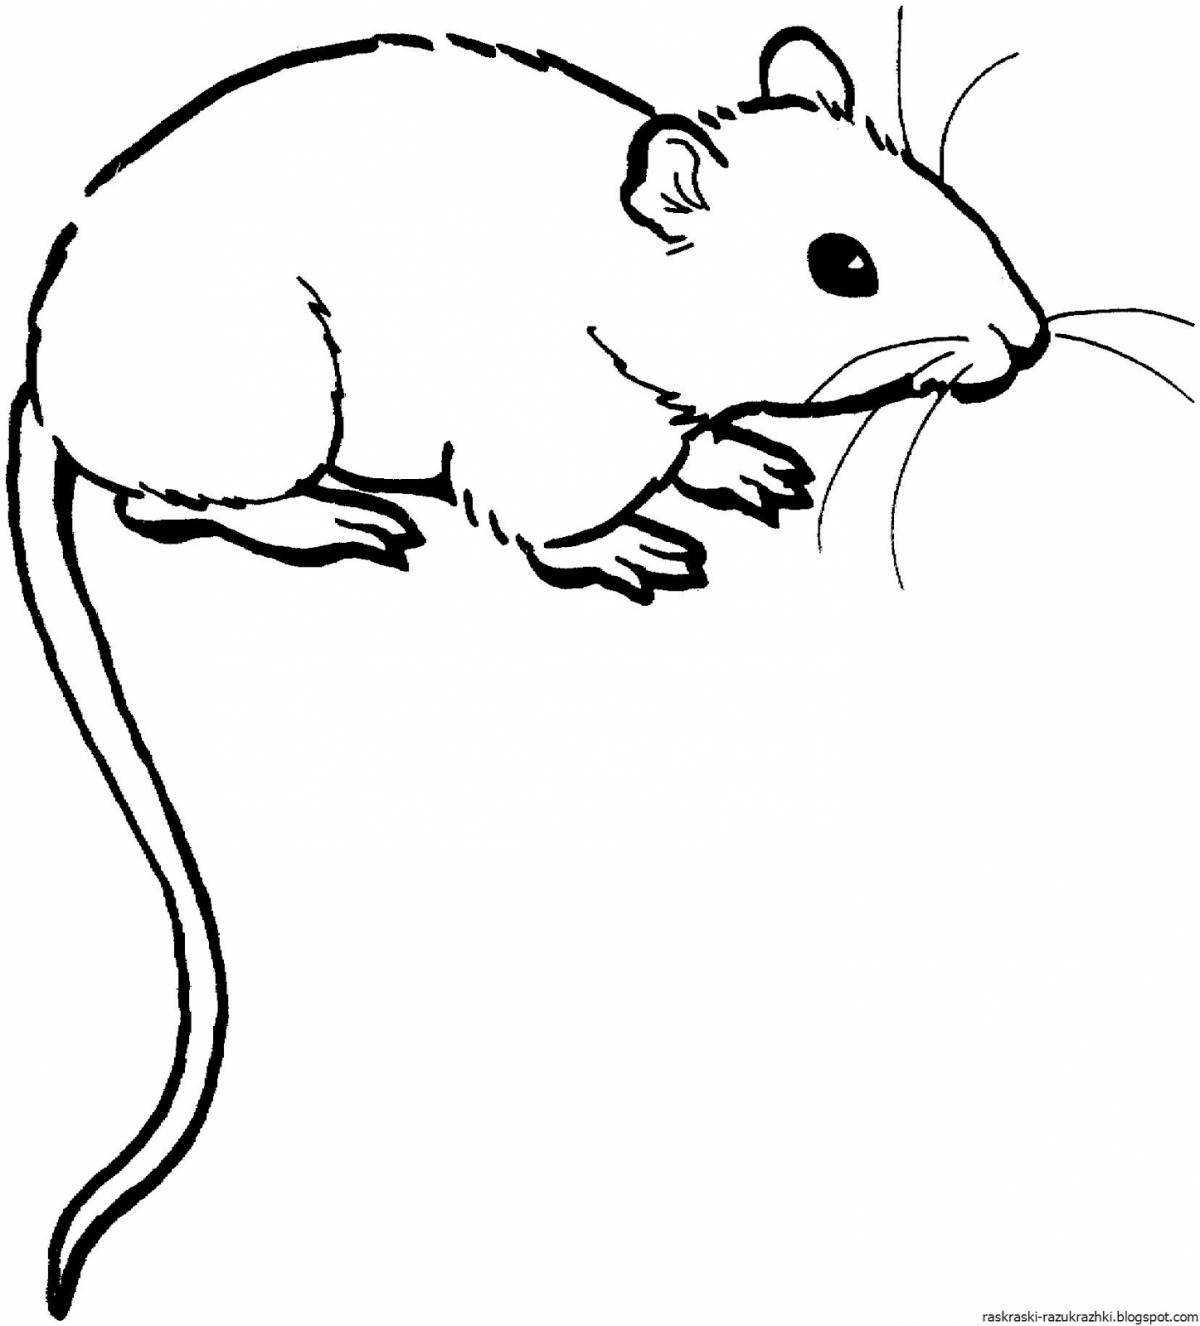 Amazing rodent coloring page